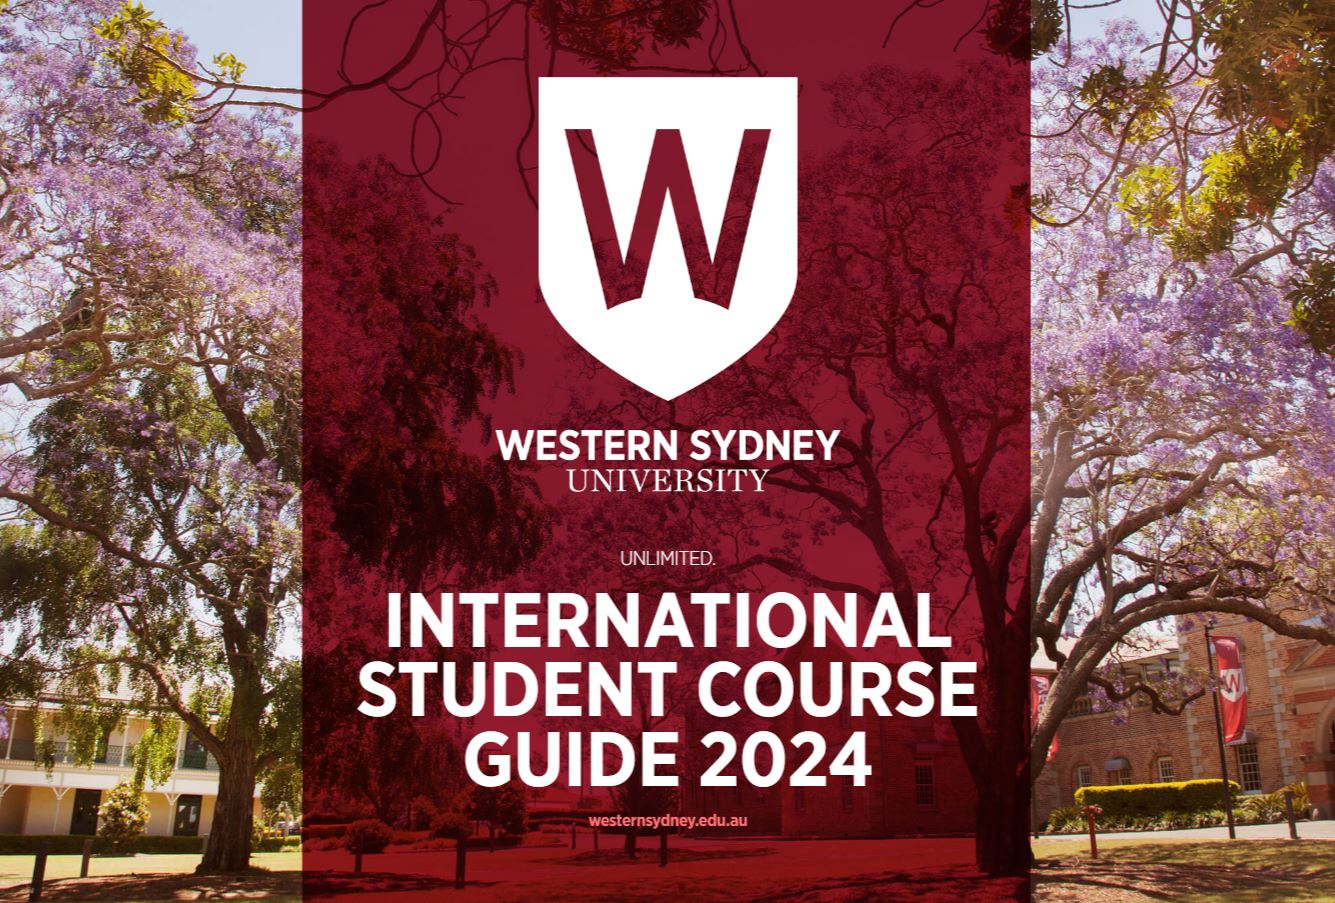 International Course Guide